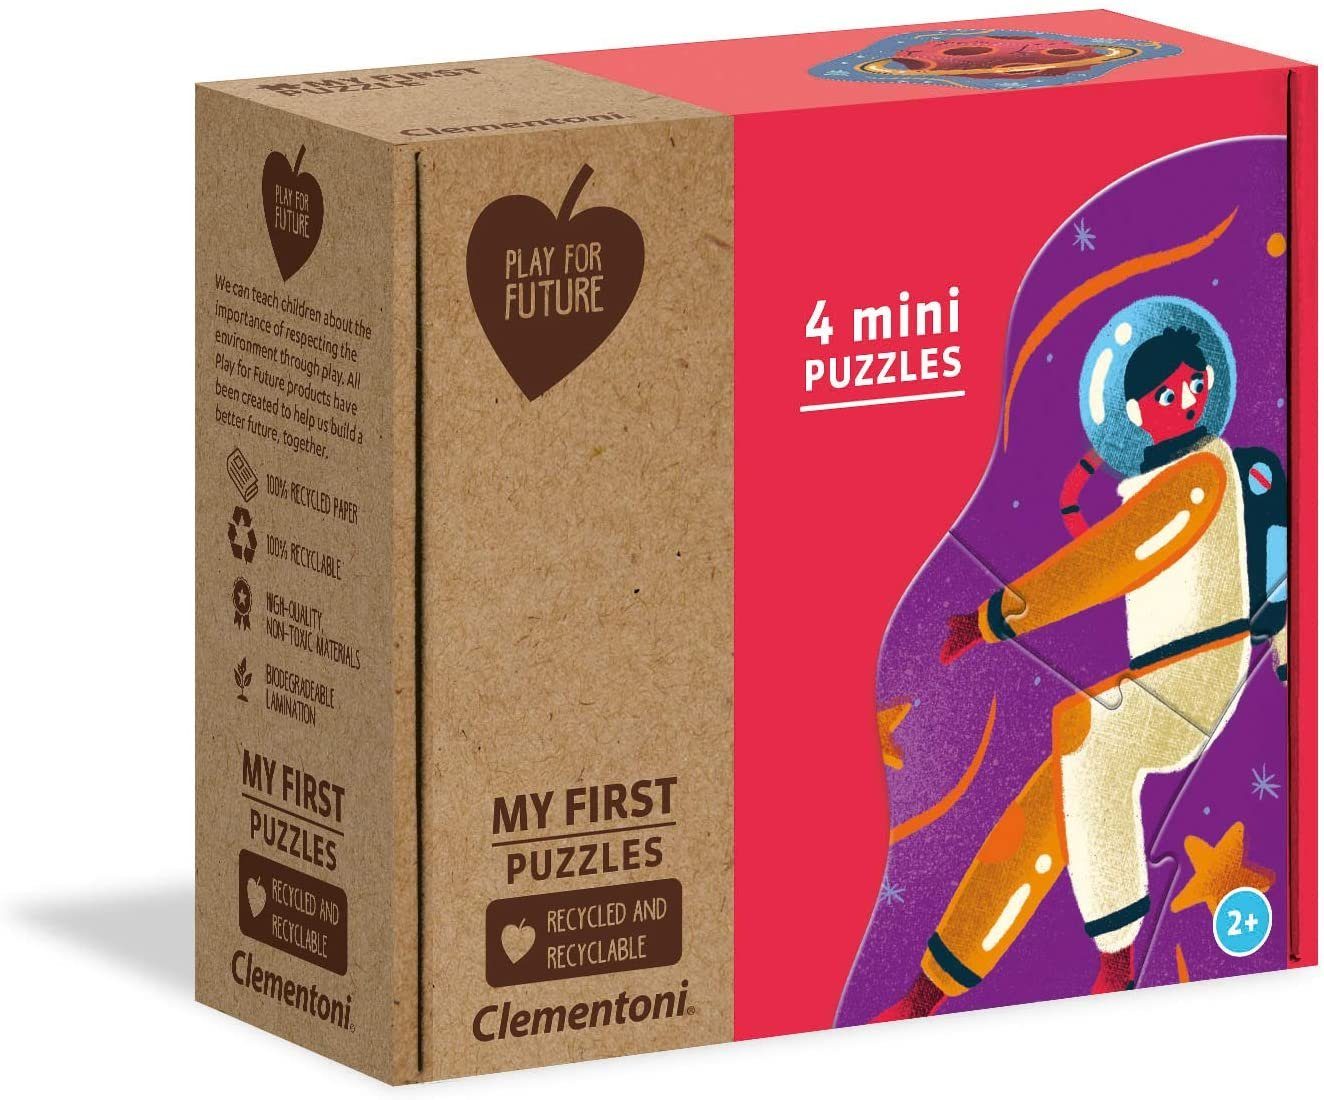 Mini-Puzzle 12 Puzzle Puzzleteile The 14 6, Future 4 Moon Over (3, for Teile), 9, Play Clementoni®